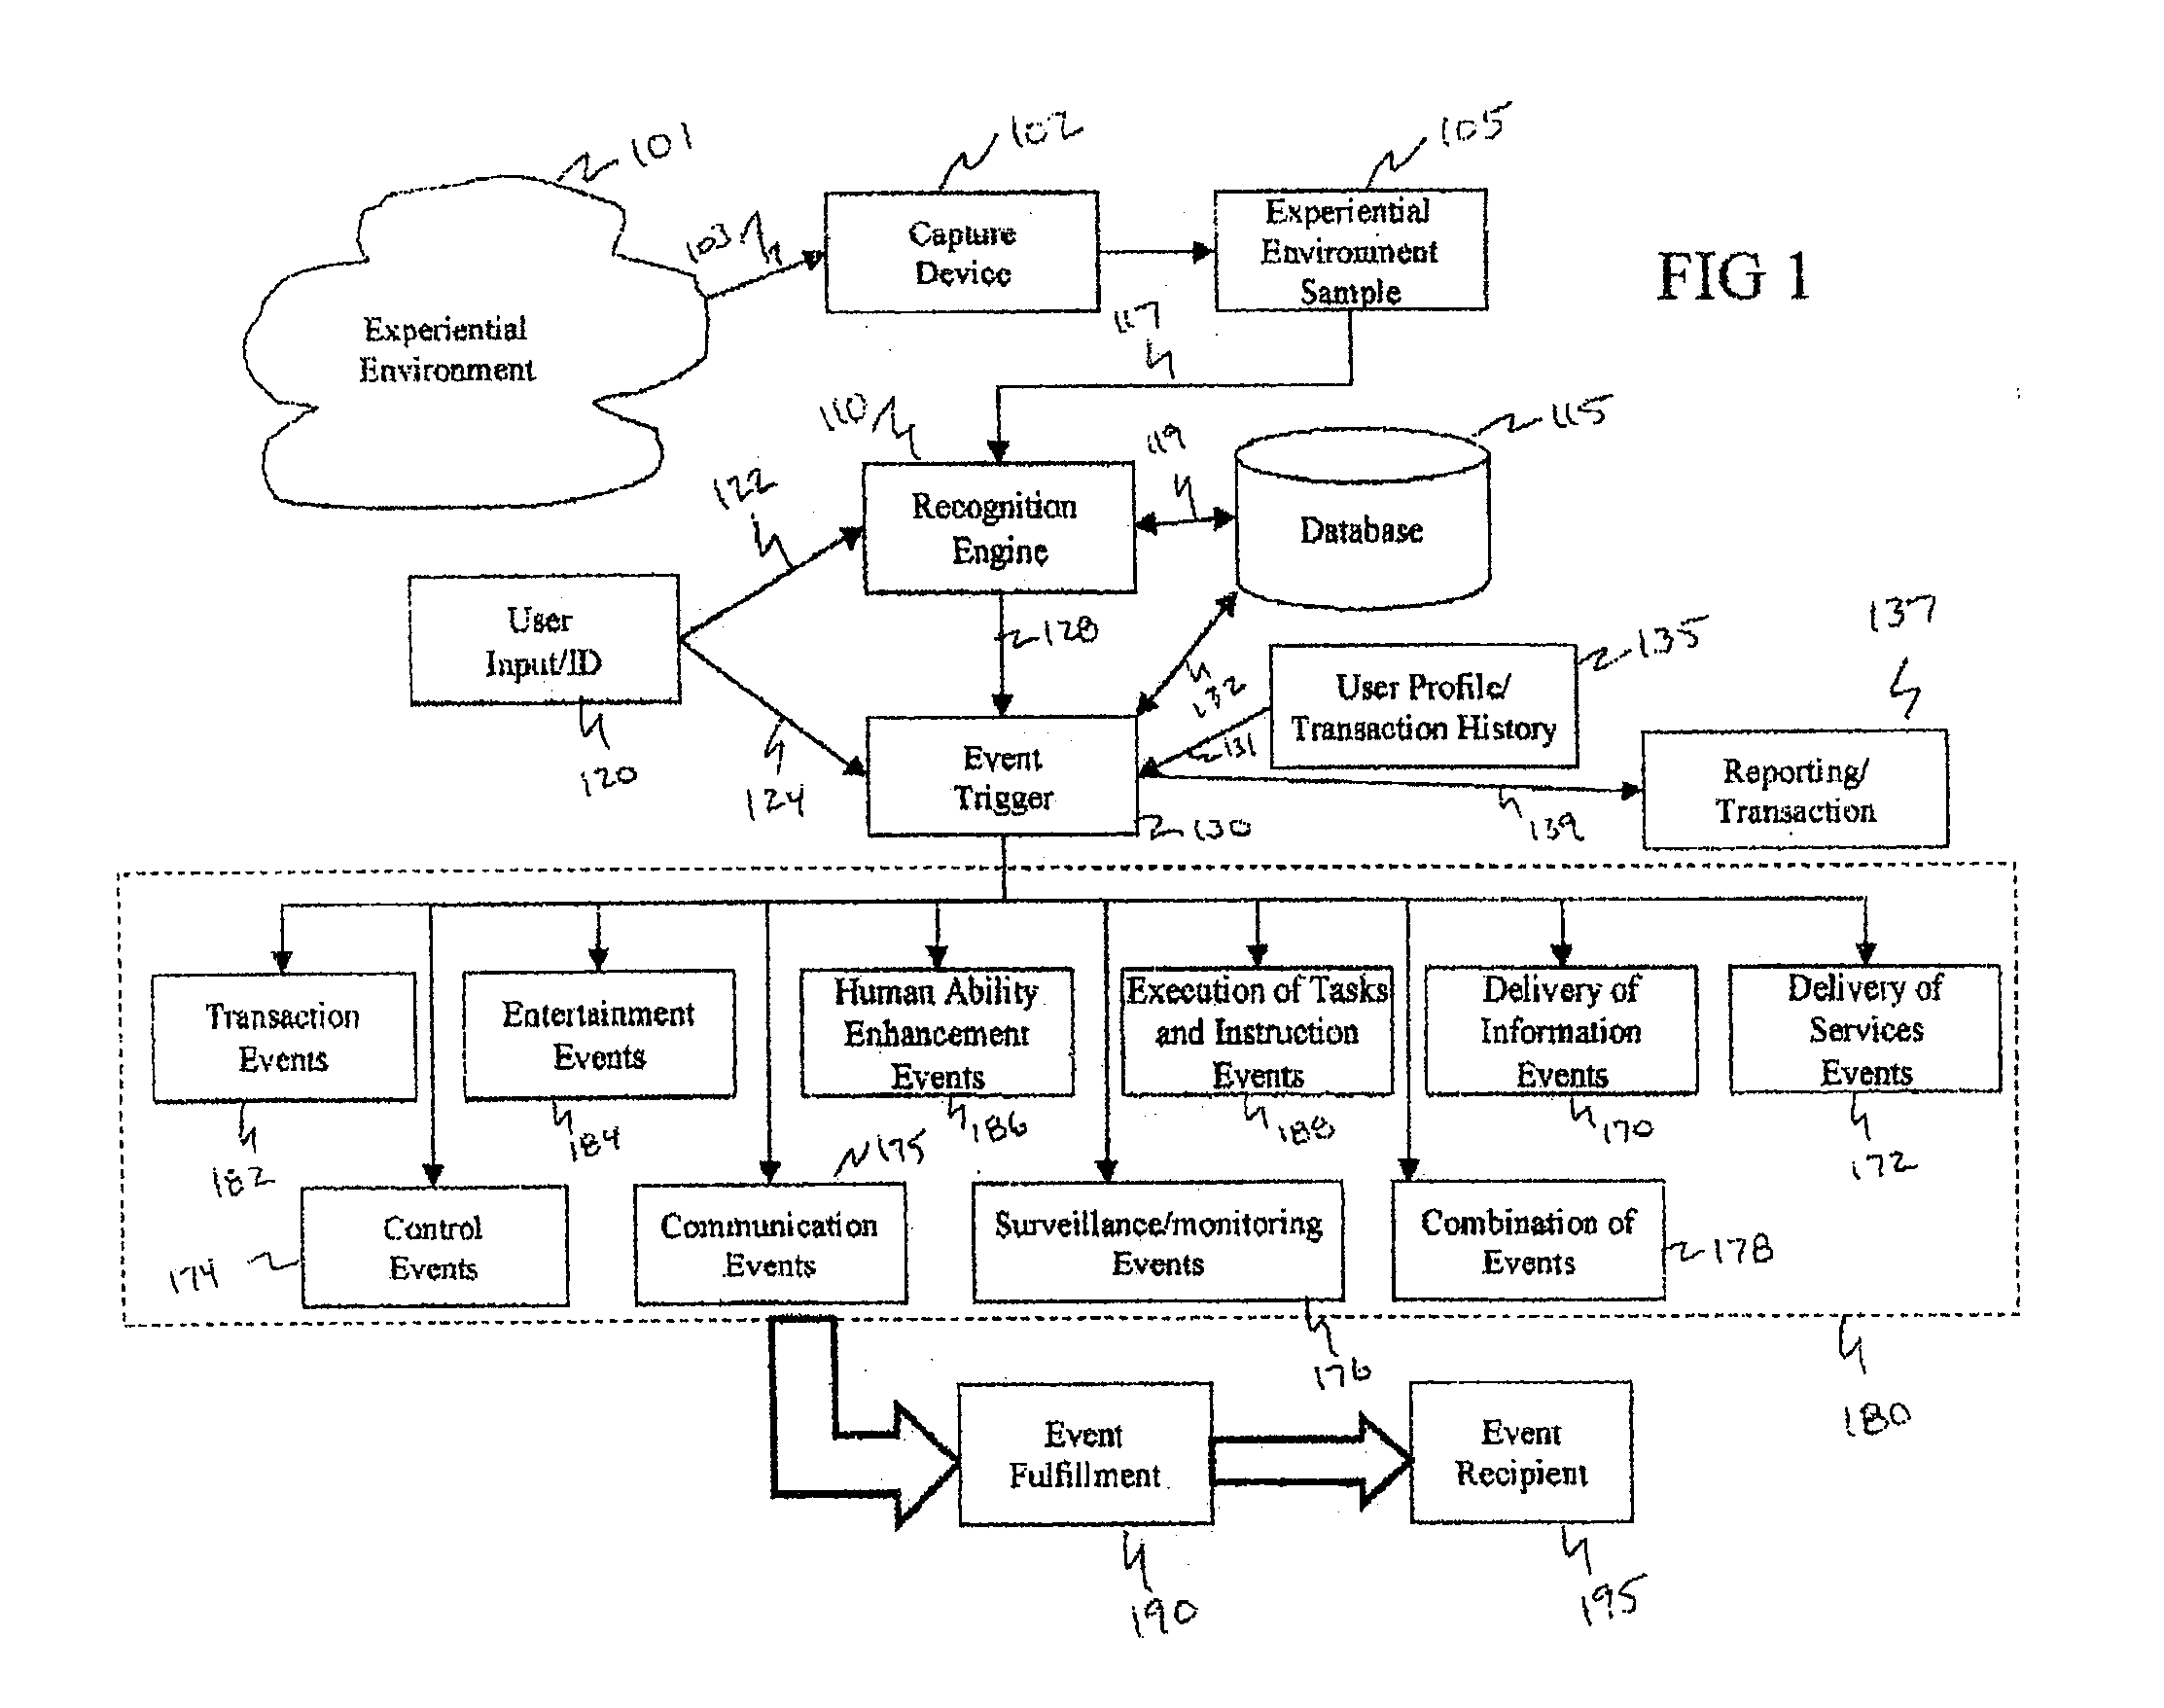 Method and system for interacting with a user in an experiential environment